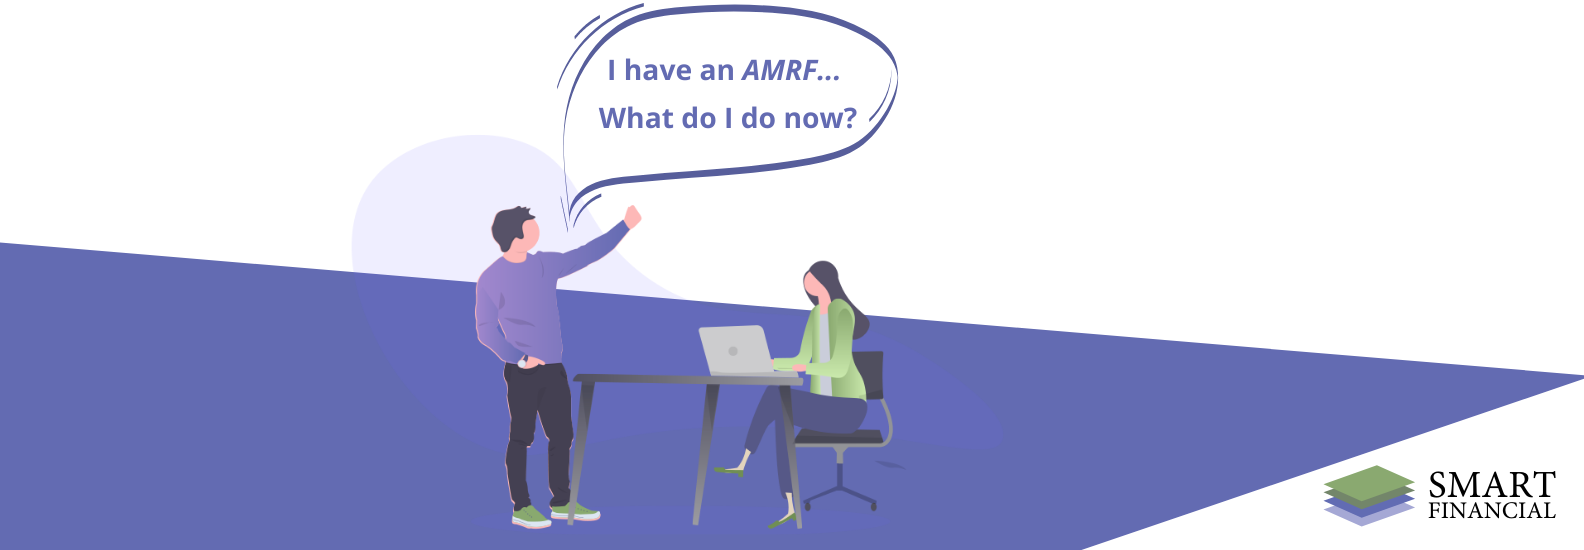 The AMRF is no more! How will this impact me?